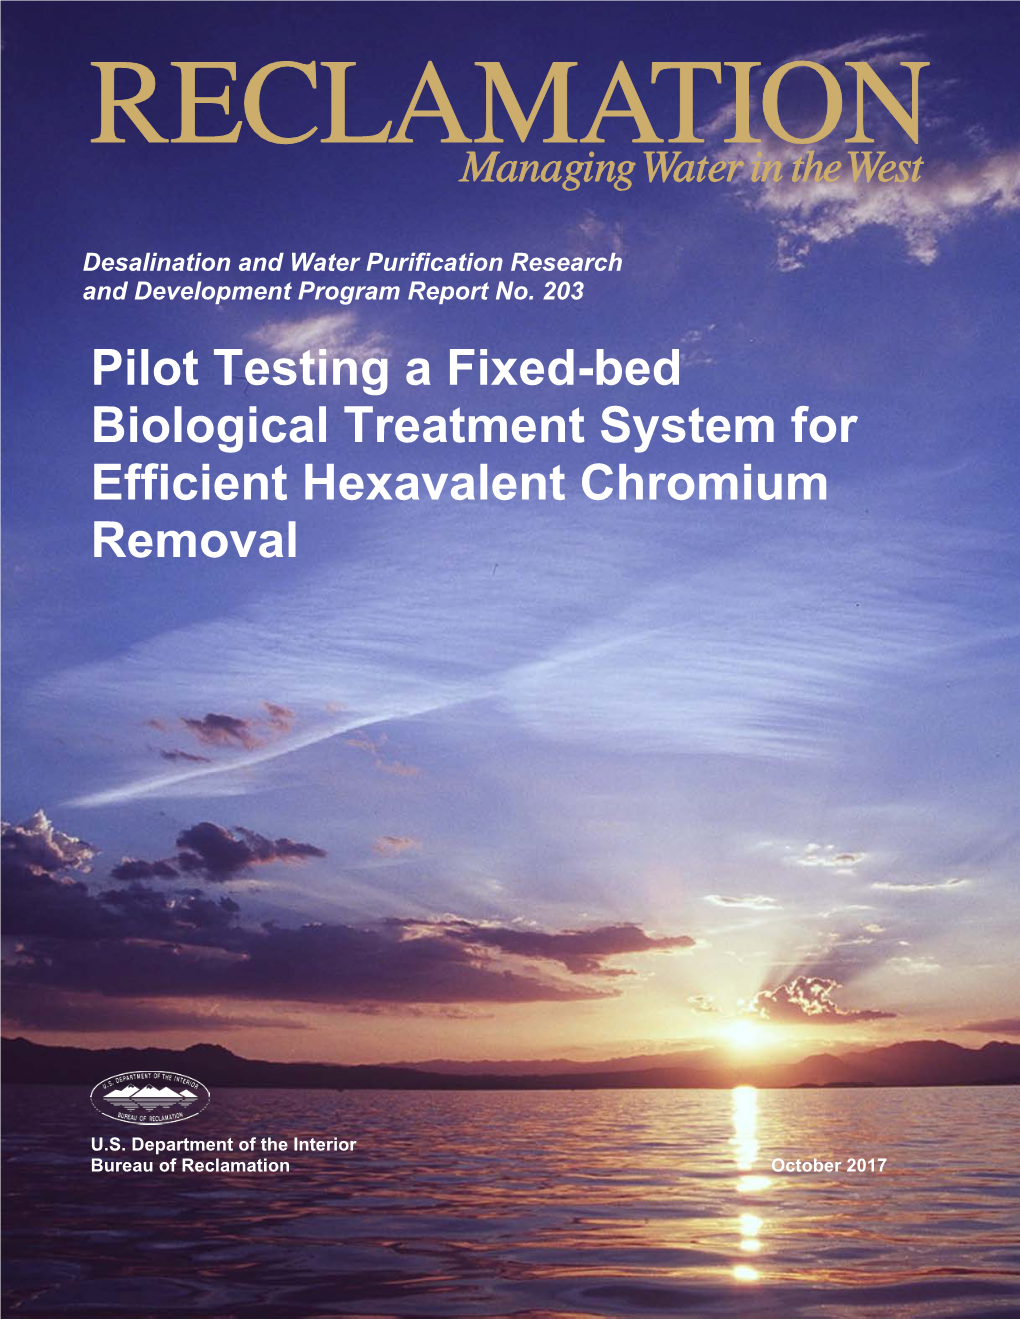 Pilot Testing a Fixed-Bed Biological Treatment System for Efficient Hexavalent Chromium Removal